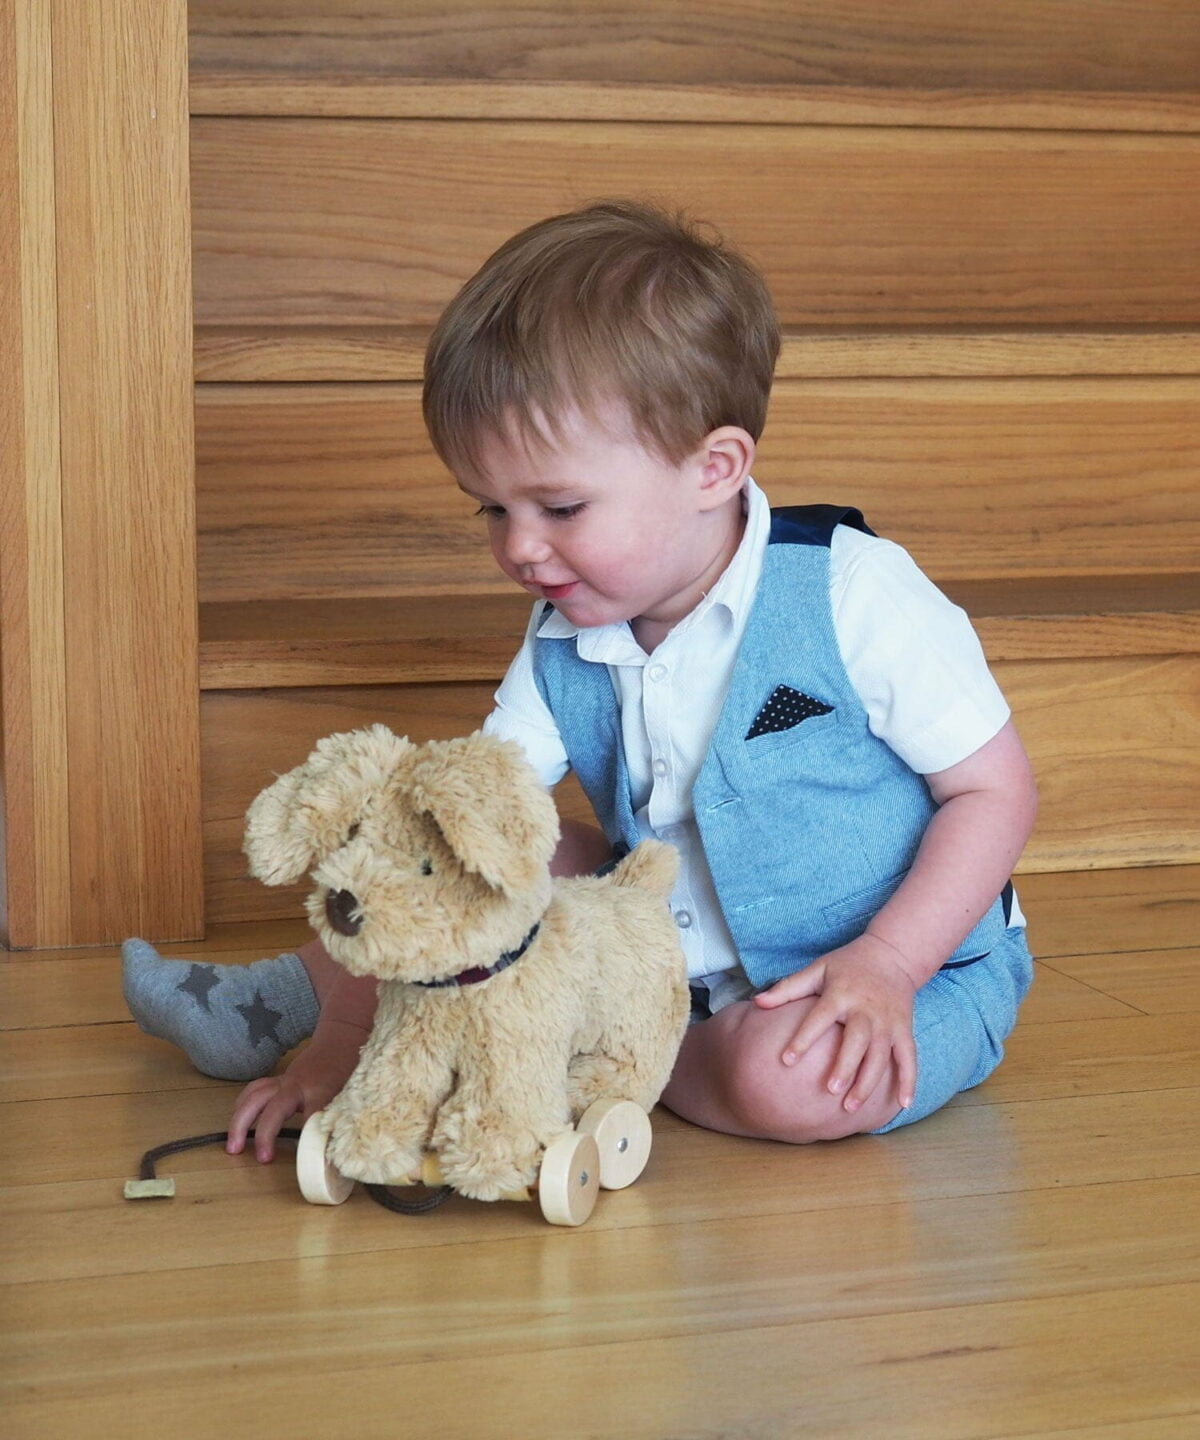 Little boy sits playing with Dexter Dog Pull Along Toy with plush sandy fabric